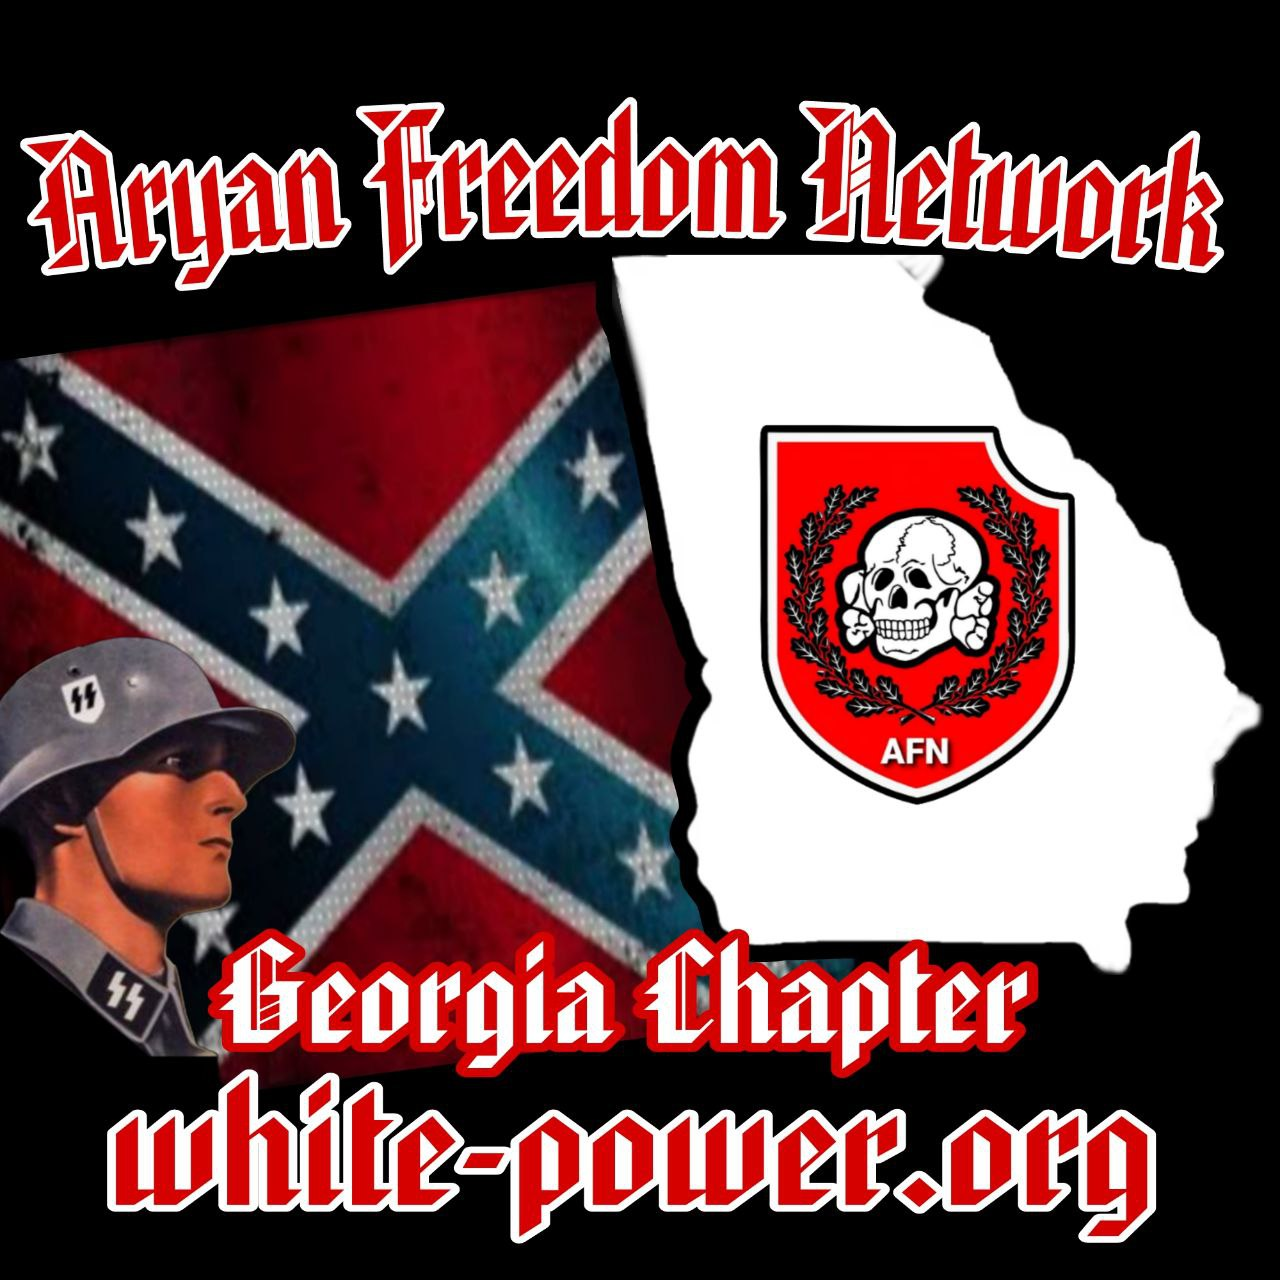 (Right Wing Extremism/Poster) Aryan Freedom Network (AFN) Anticipated Expansion with "Georgia Chapter" Poster, United States - 13 August 2023